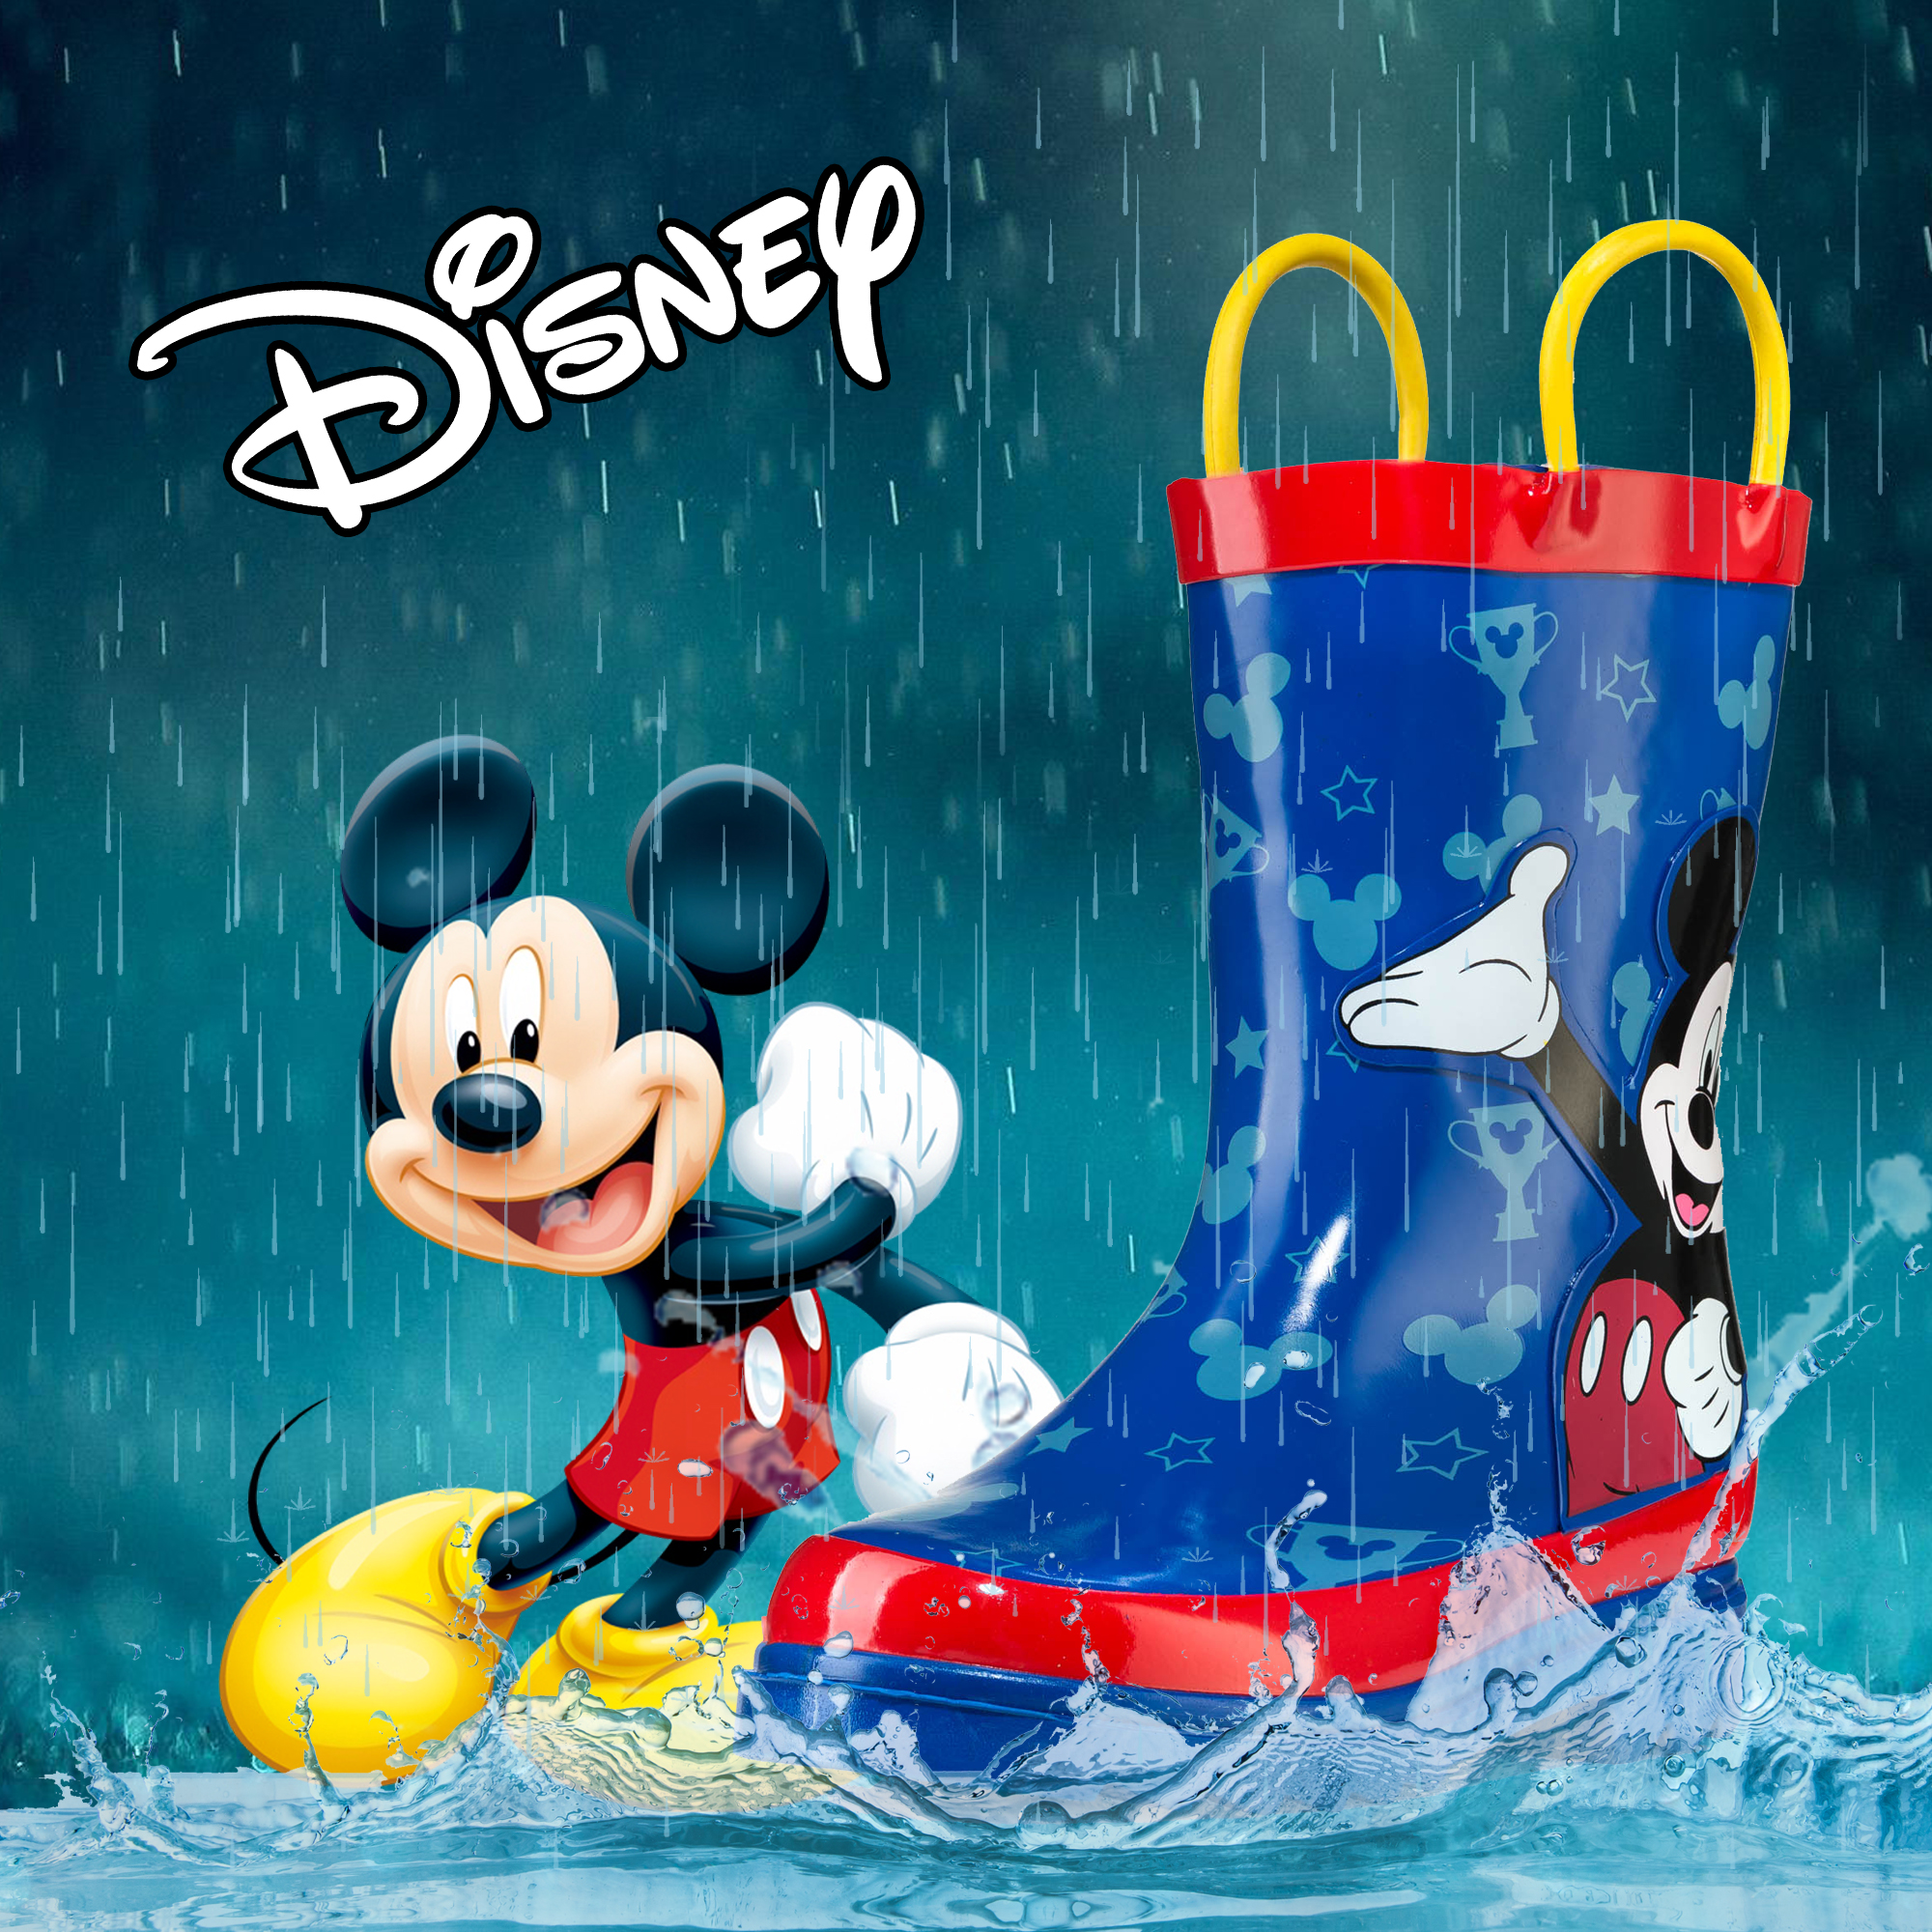 Disney Mickey Mouse Blue Rubber Rain Boots - Size 5 toddler - image 5 of 6